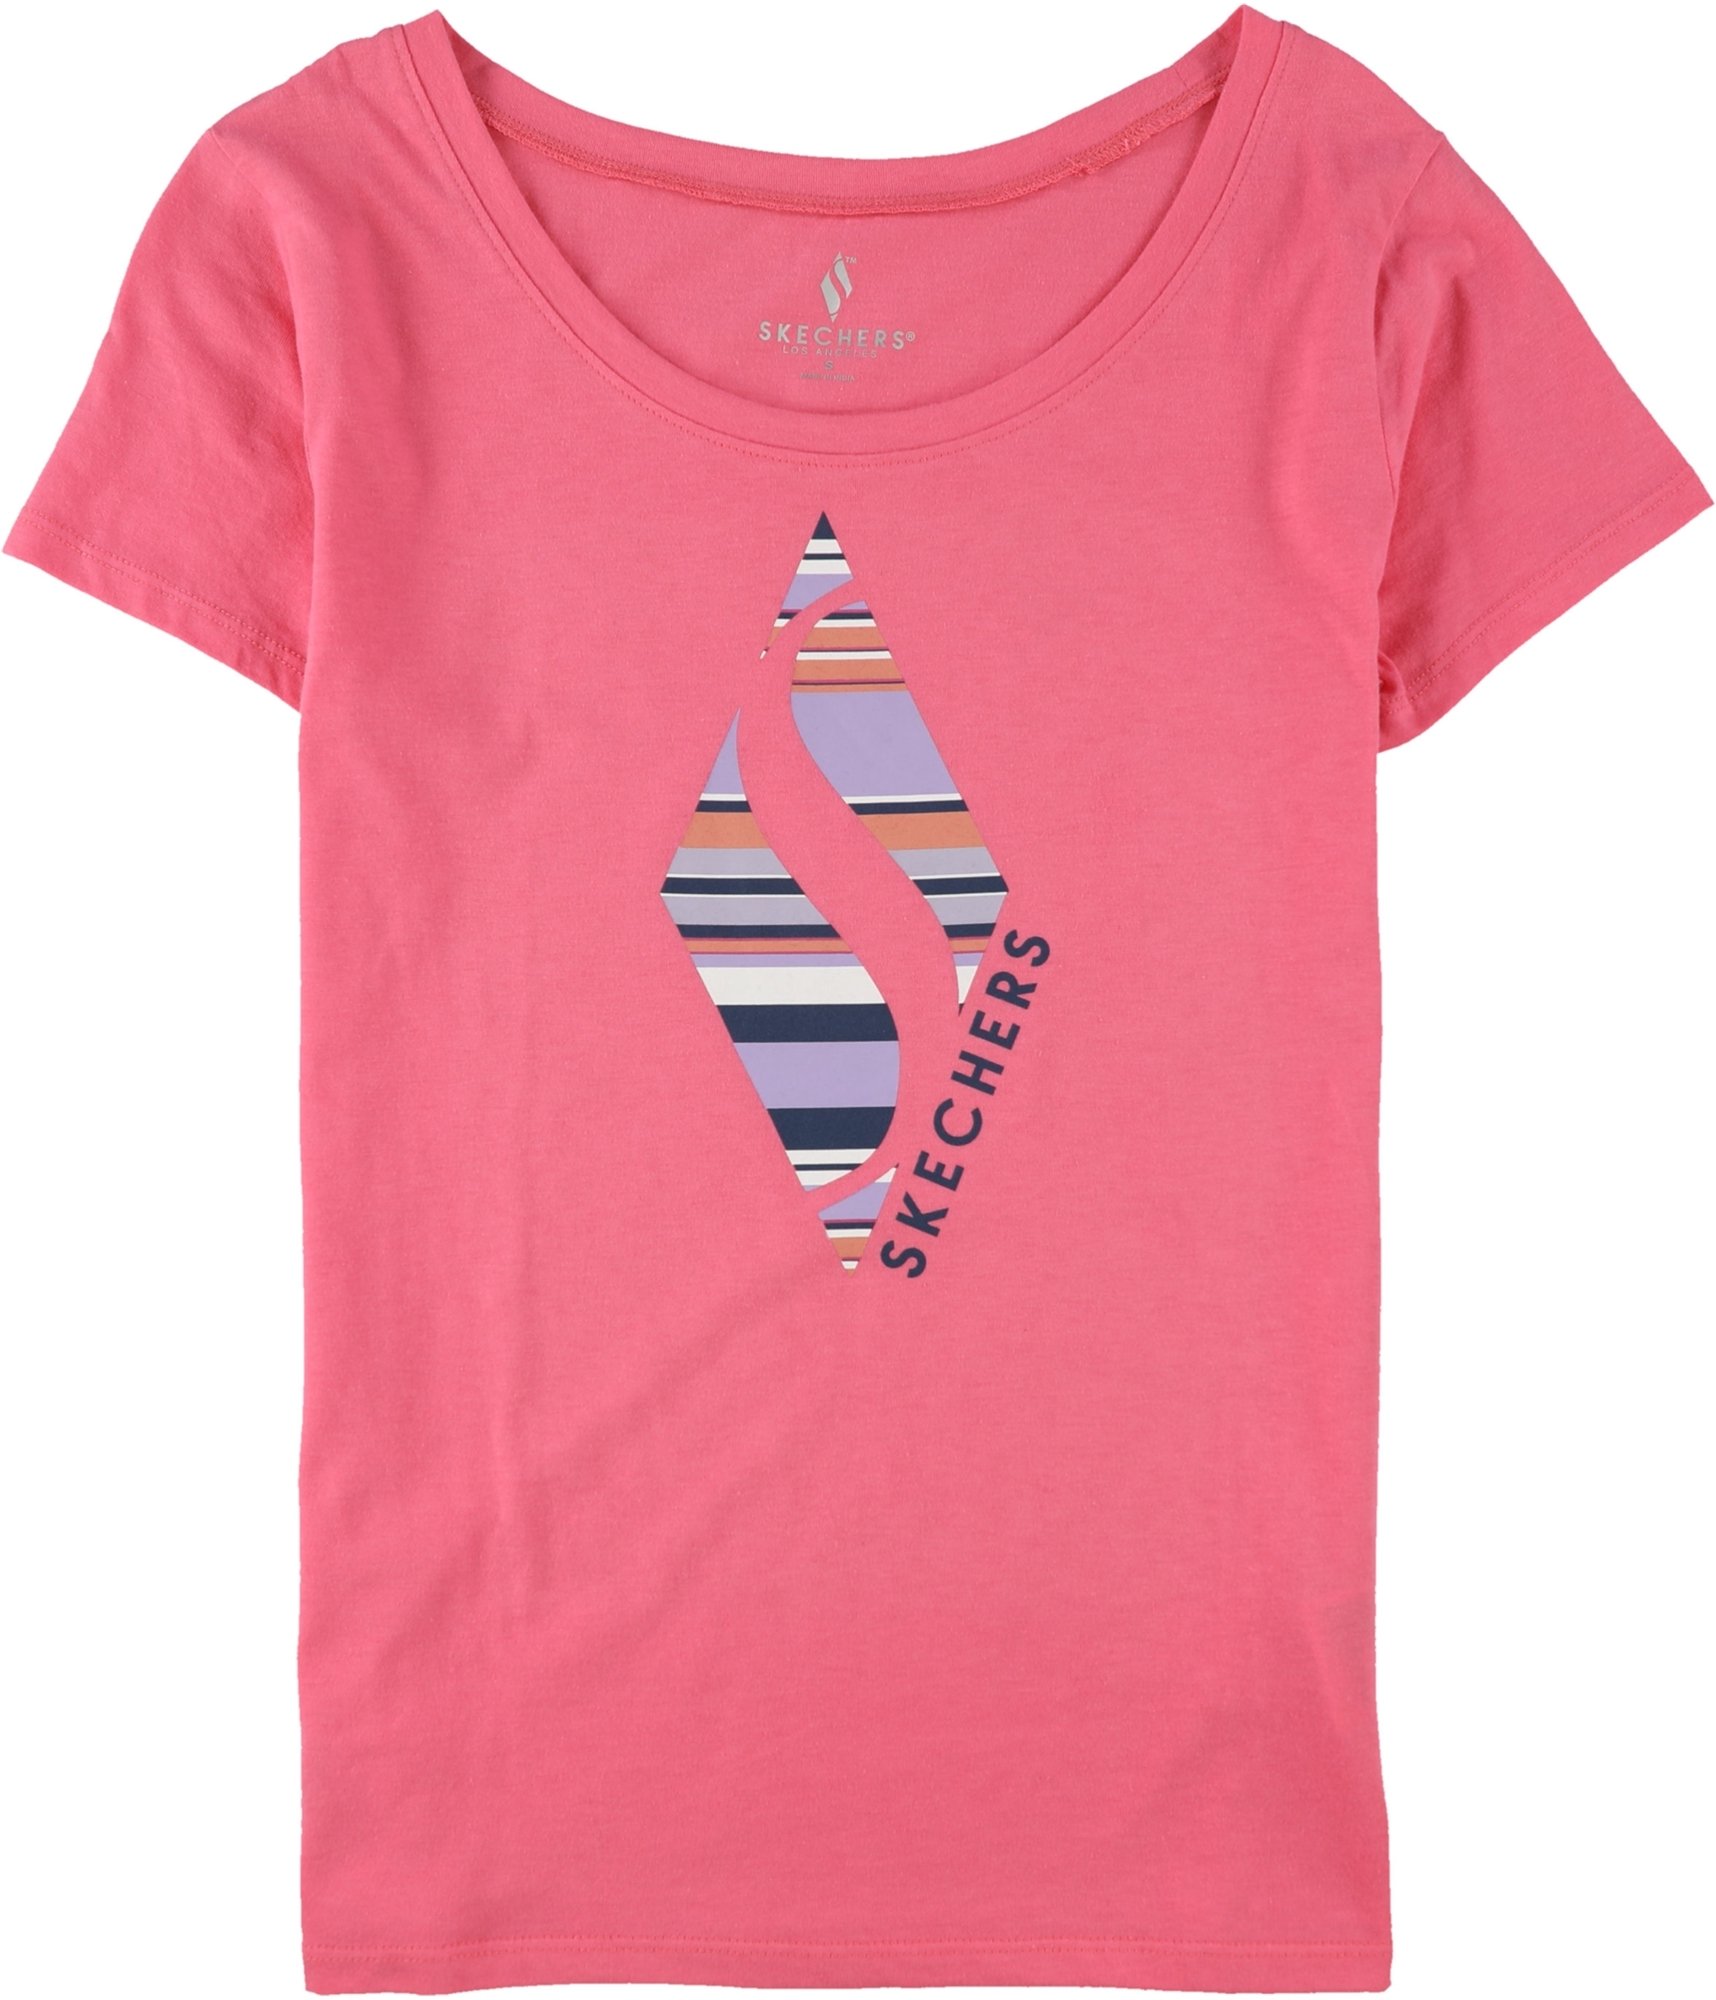 Buy Tagsweekly | Graphic Skechers Striped T-Shirt a Womens Diamond